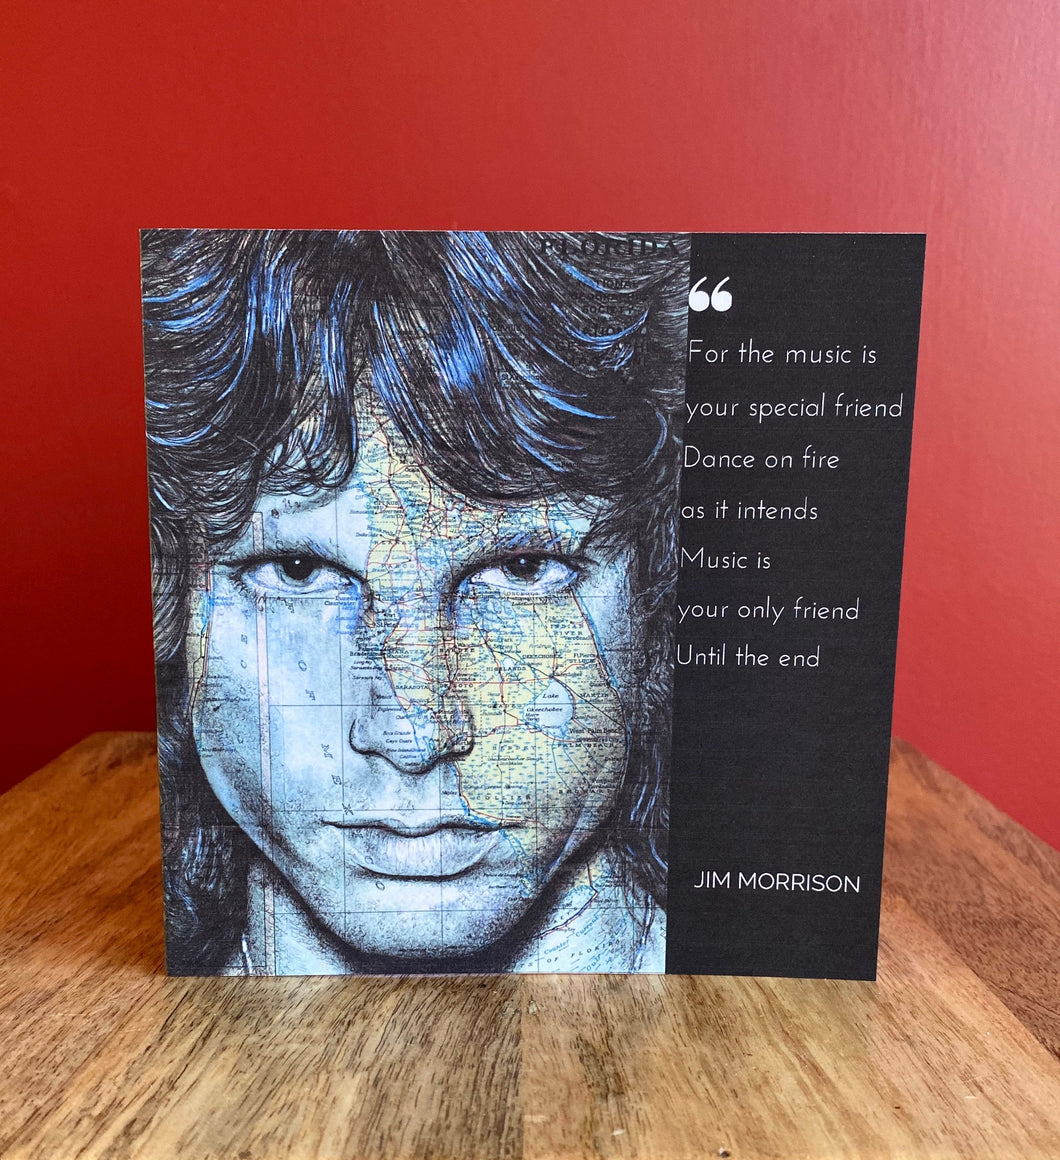 Jim Morrison/The Doors Greeting Card. Printed drawing over map of Los Angeles. Blank inside